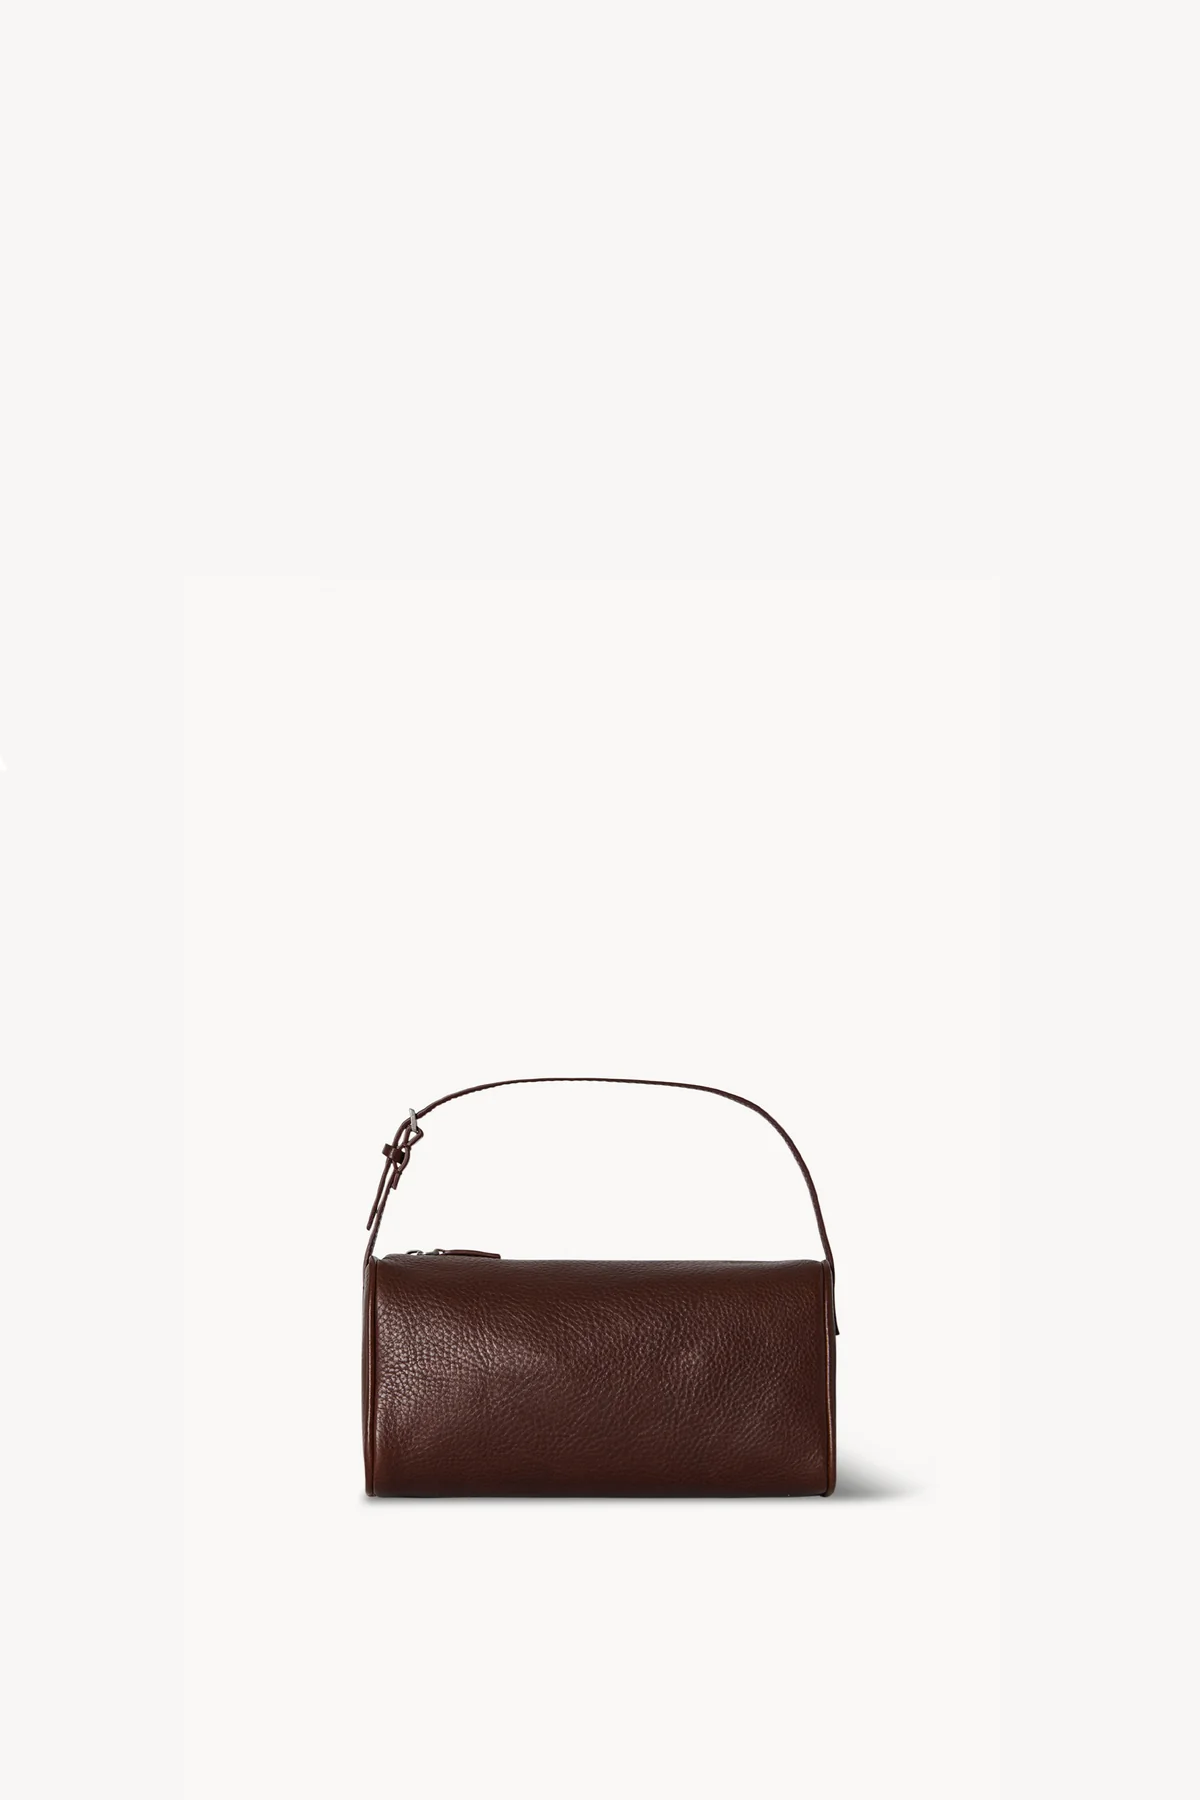 Shop The Row 90's Bag In Ans Bnwas Burnt Wood